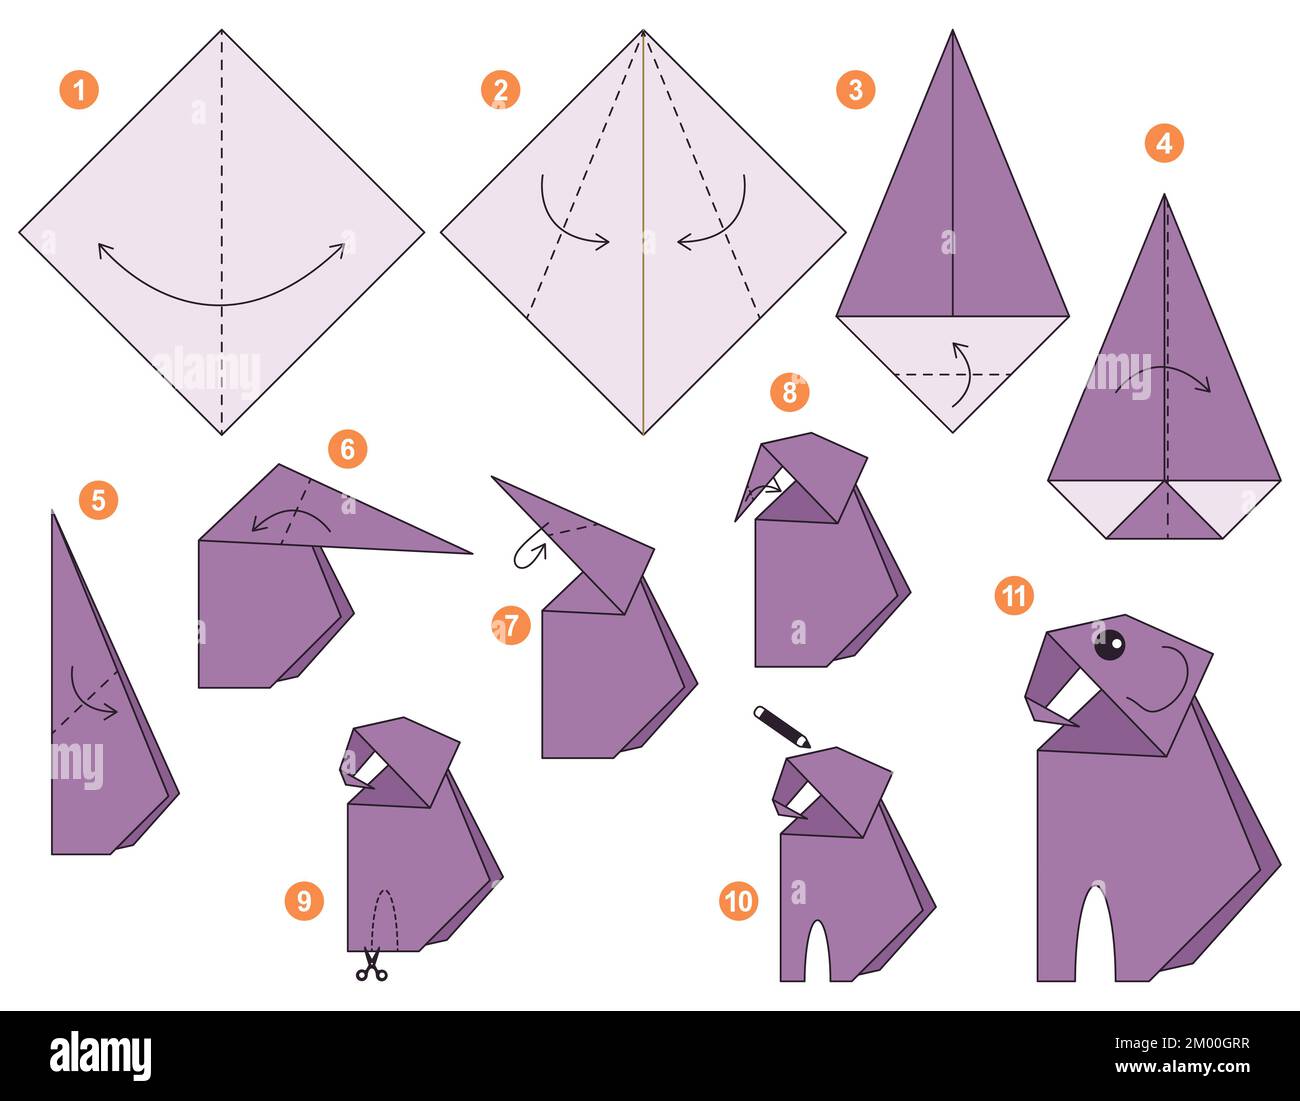 Elephant origami outline Cut Out Stock Images & Pictures - Alamy